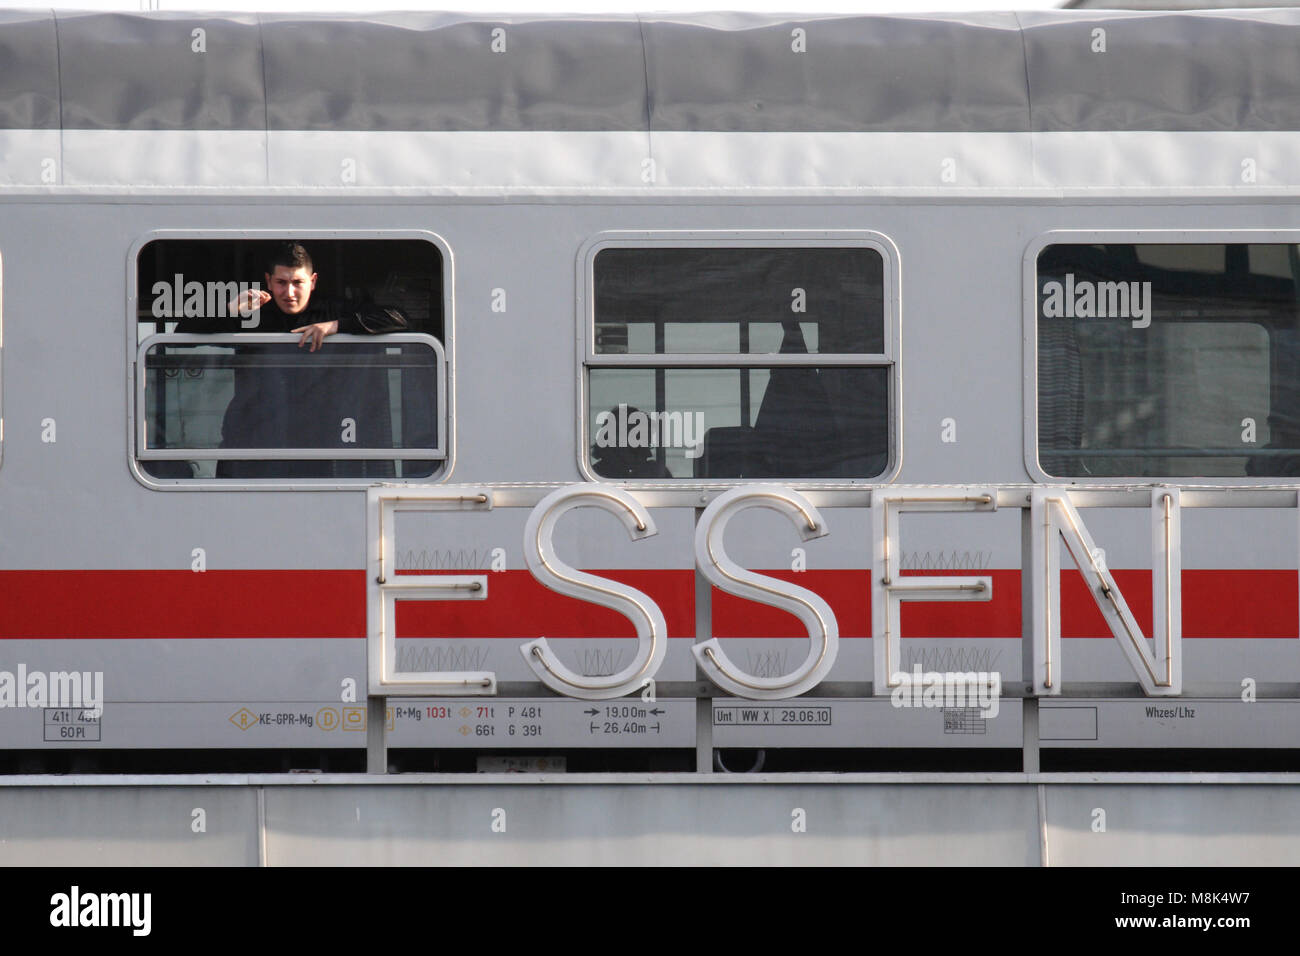 Bahn in Essen, Germany. A man is looking out of the window. Directly in front of the carriage is the station name of Essen Hauptbahnhof (Main Station) Stock Photo